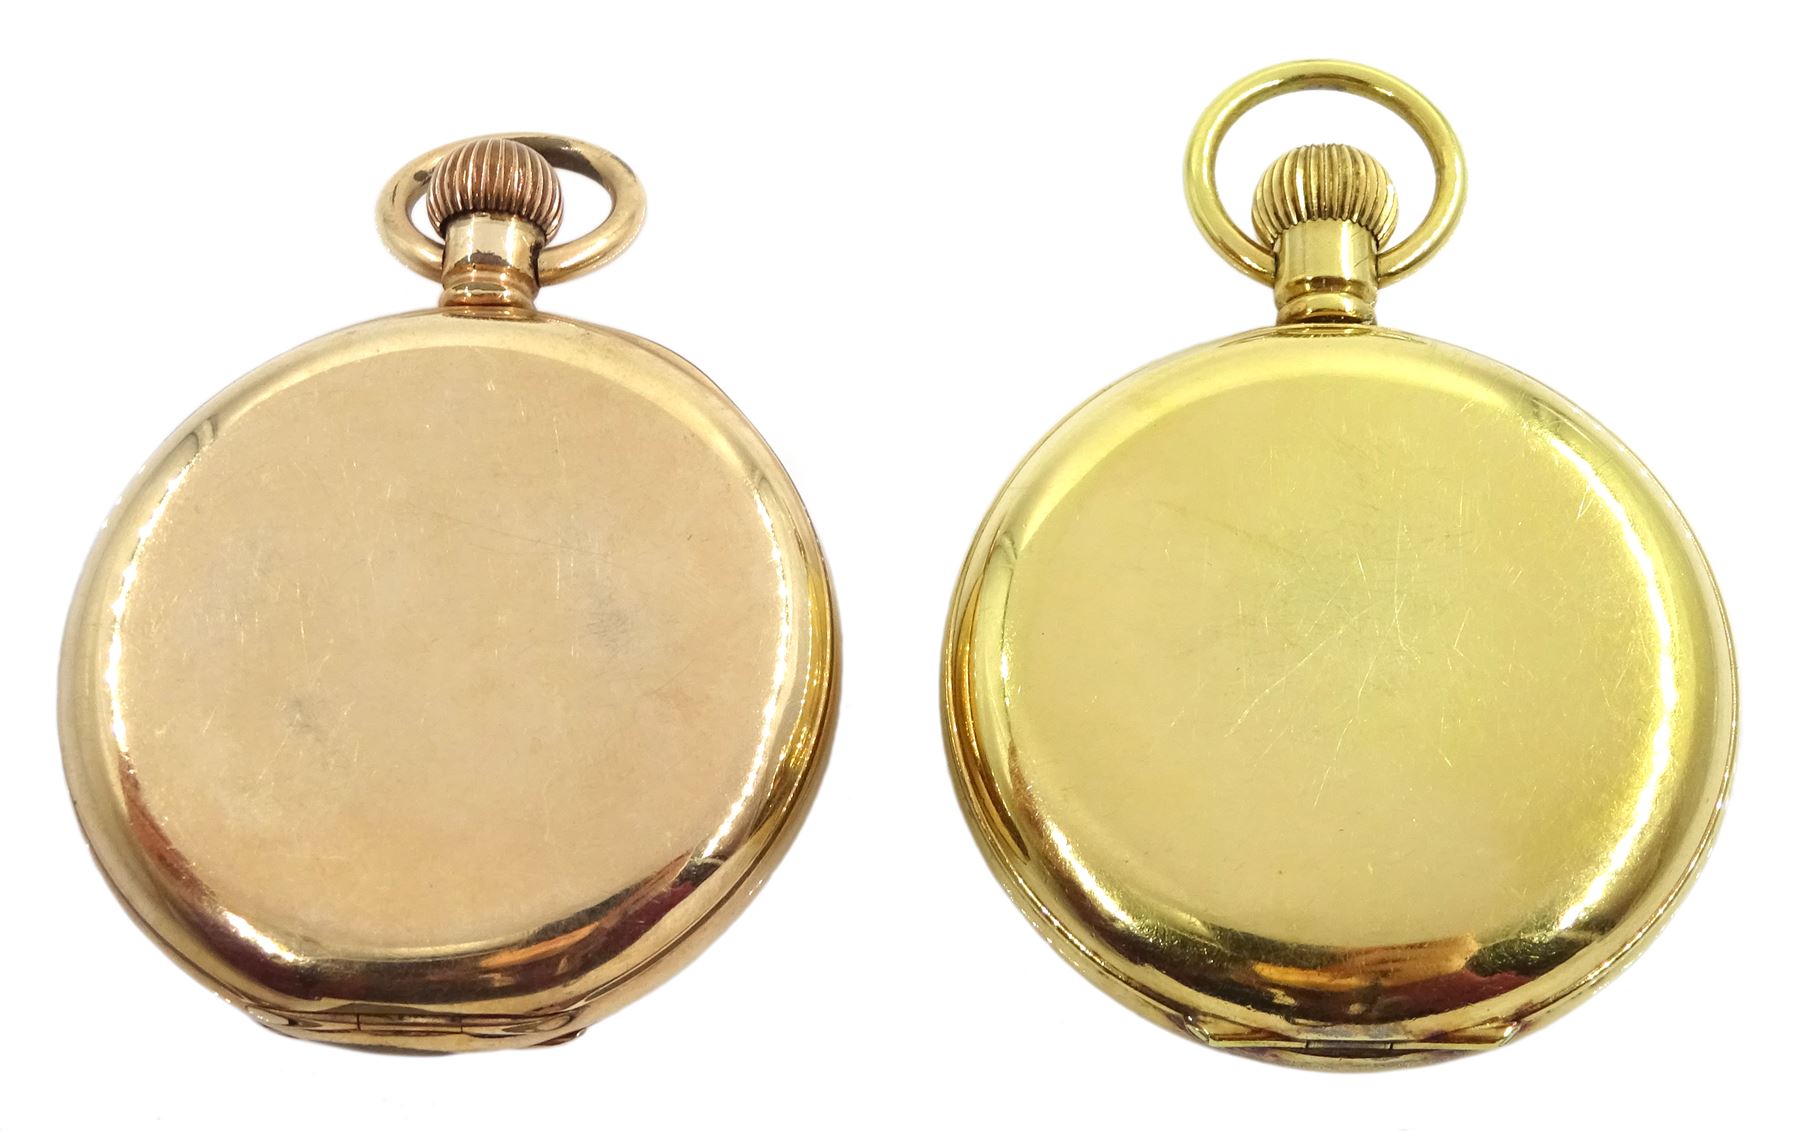 American gold-plated open face 15 jewels keyless lever pocket watch by Waltham - Image 2 of 3